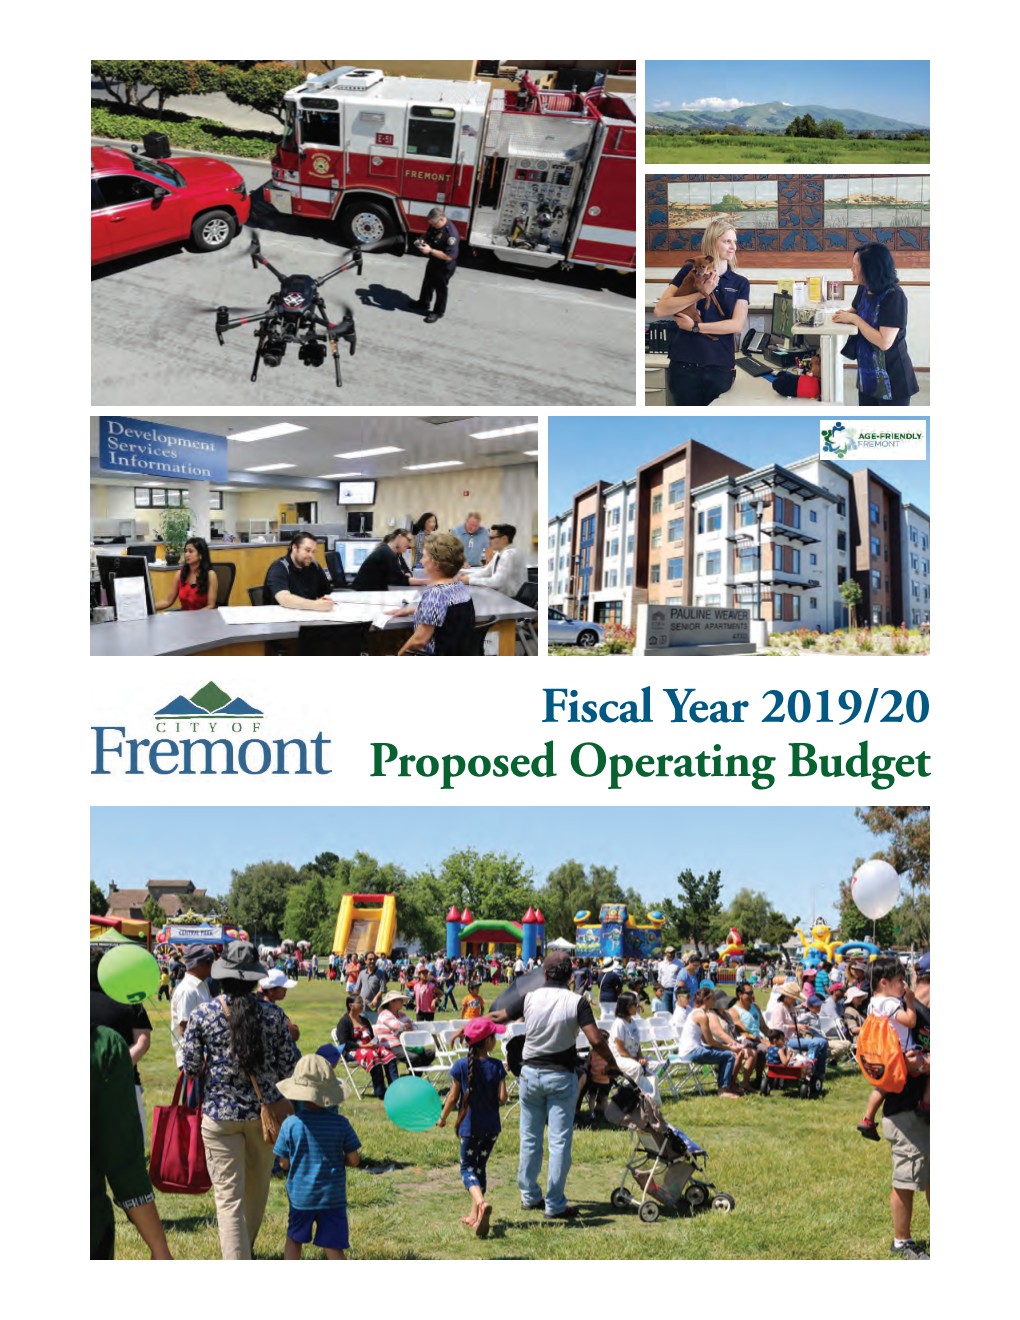 Fiscal Year 2019/20 Proposed Operating Budget